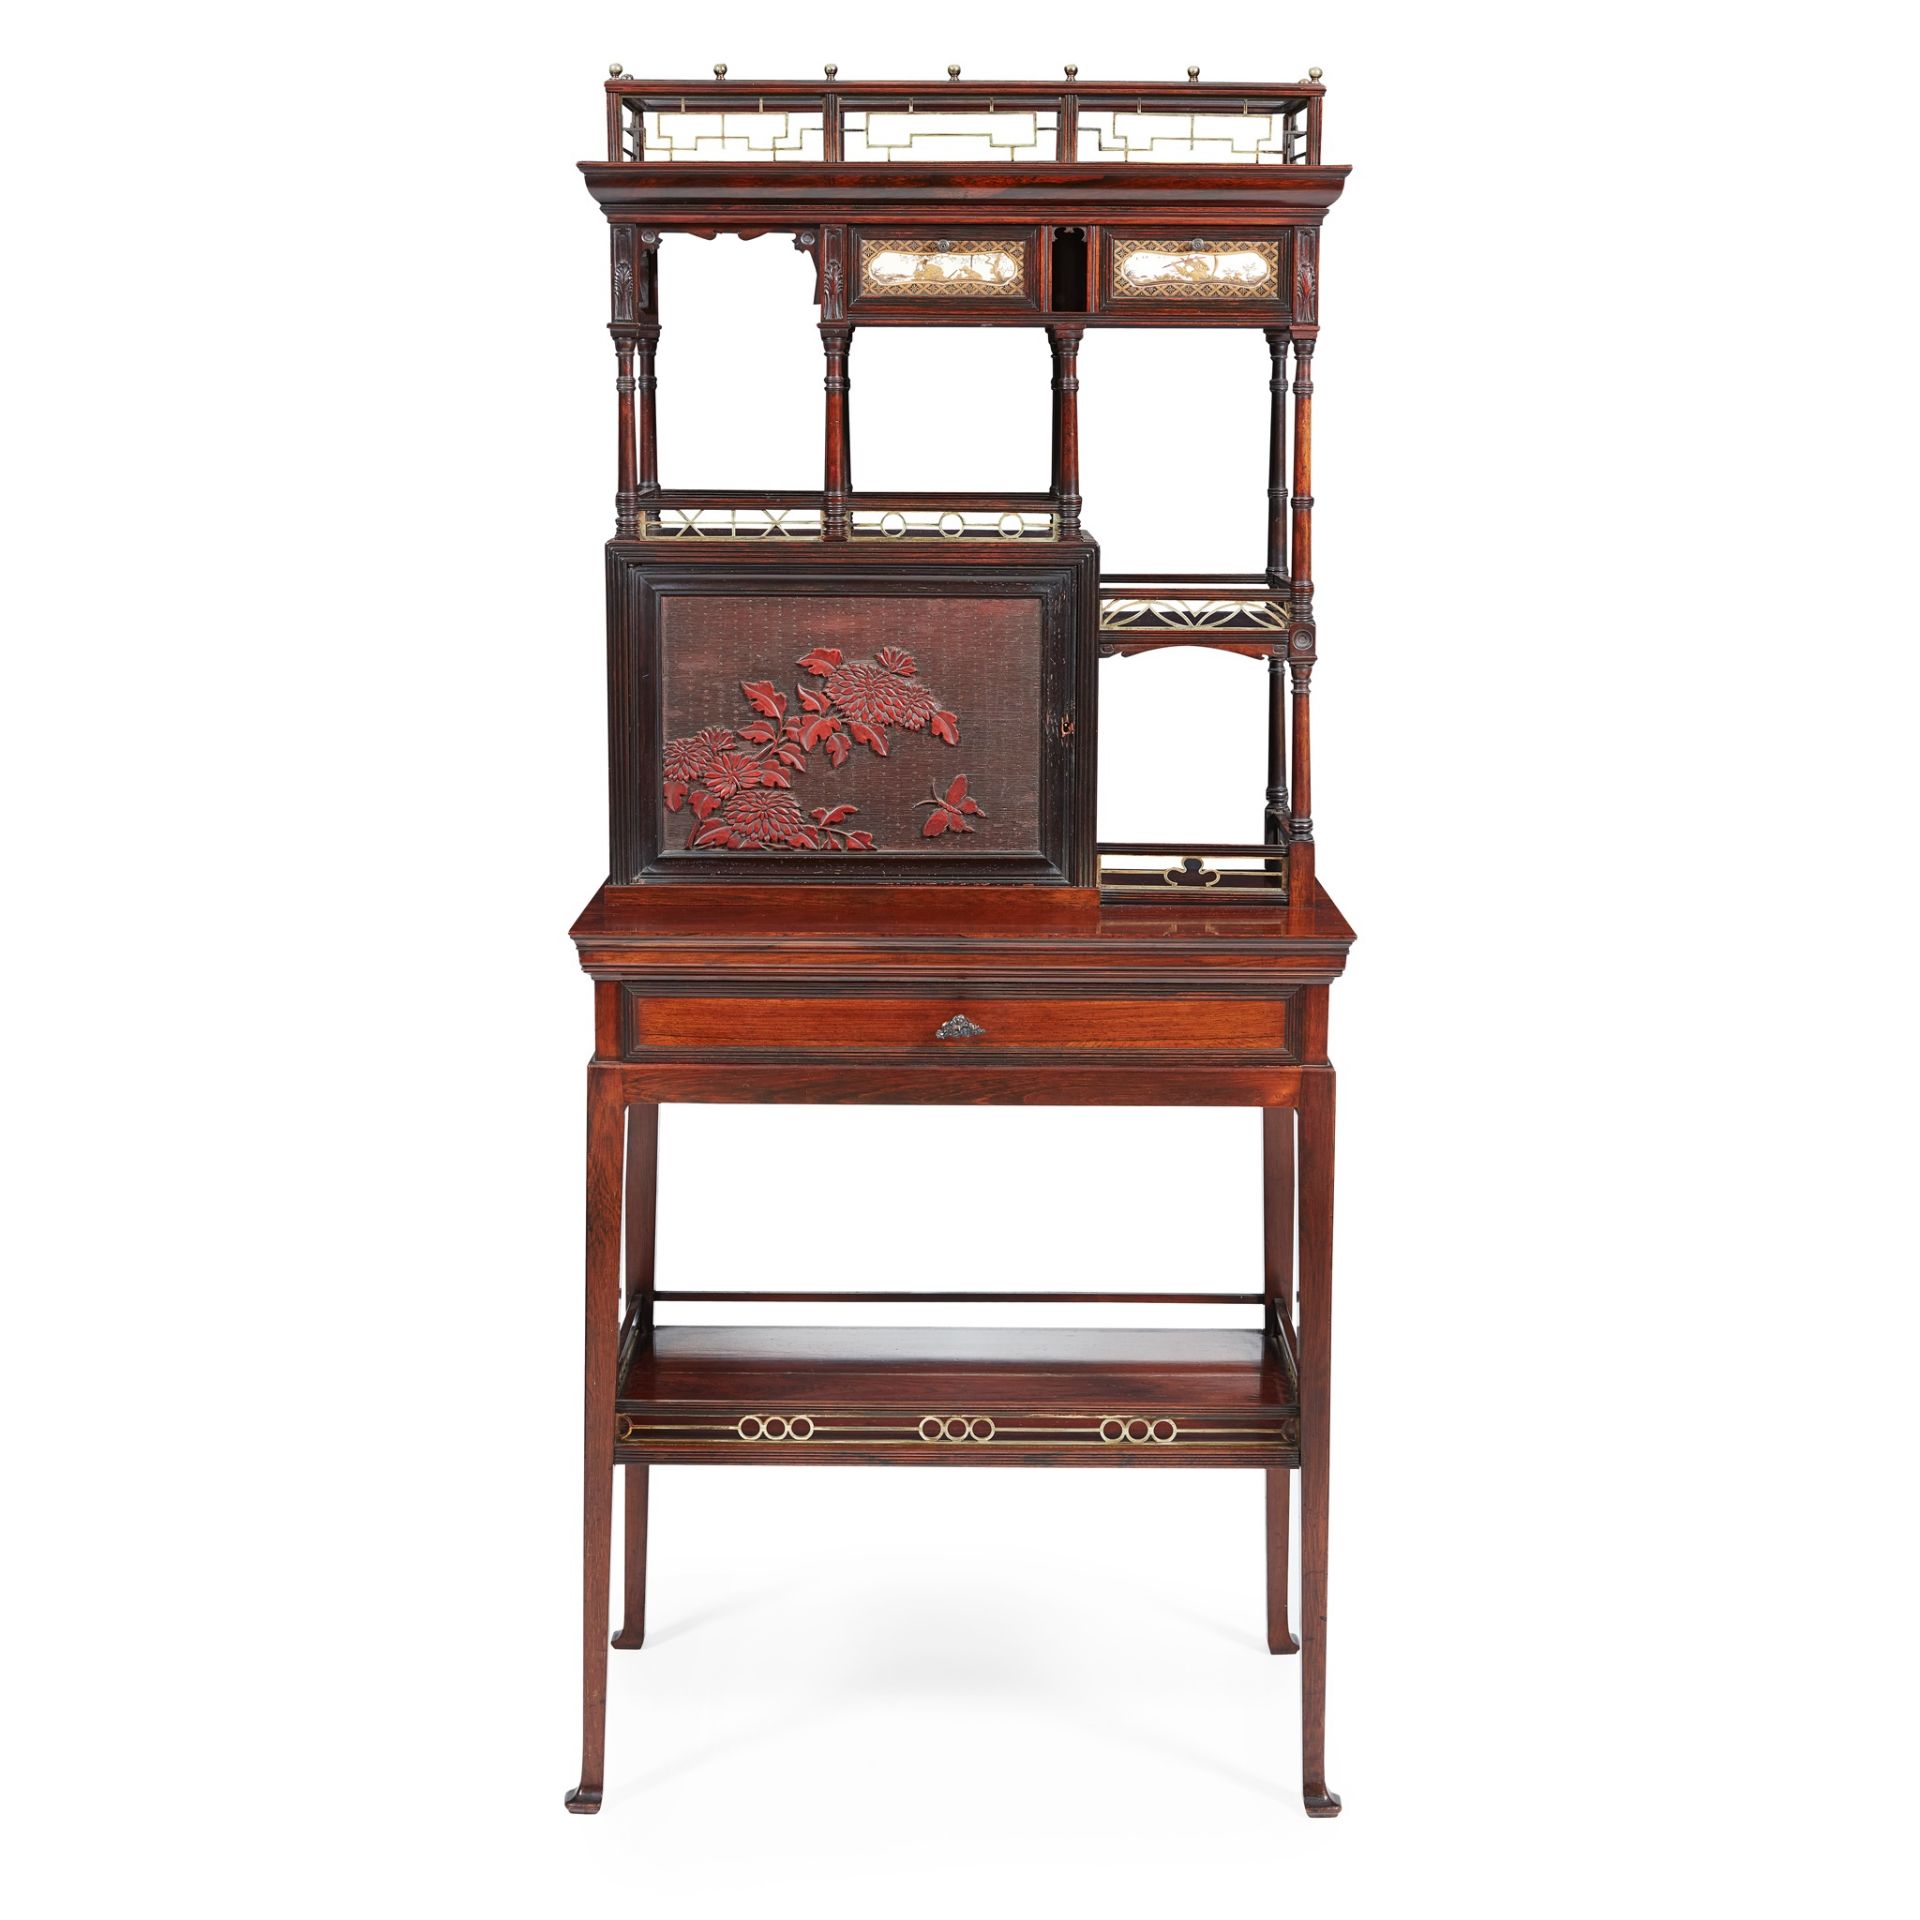 Y HOWARD & SONS, LONDON AESTHETIC MOVEMENT SIDE CABINET, CIRCA 1875